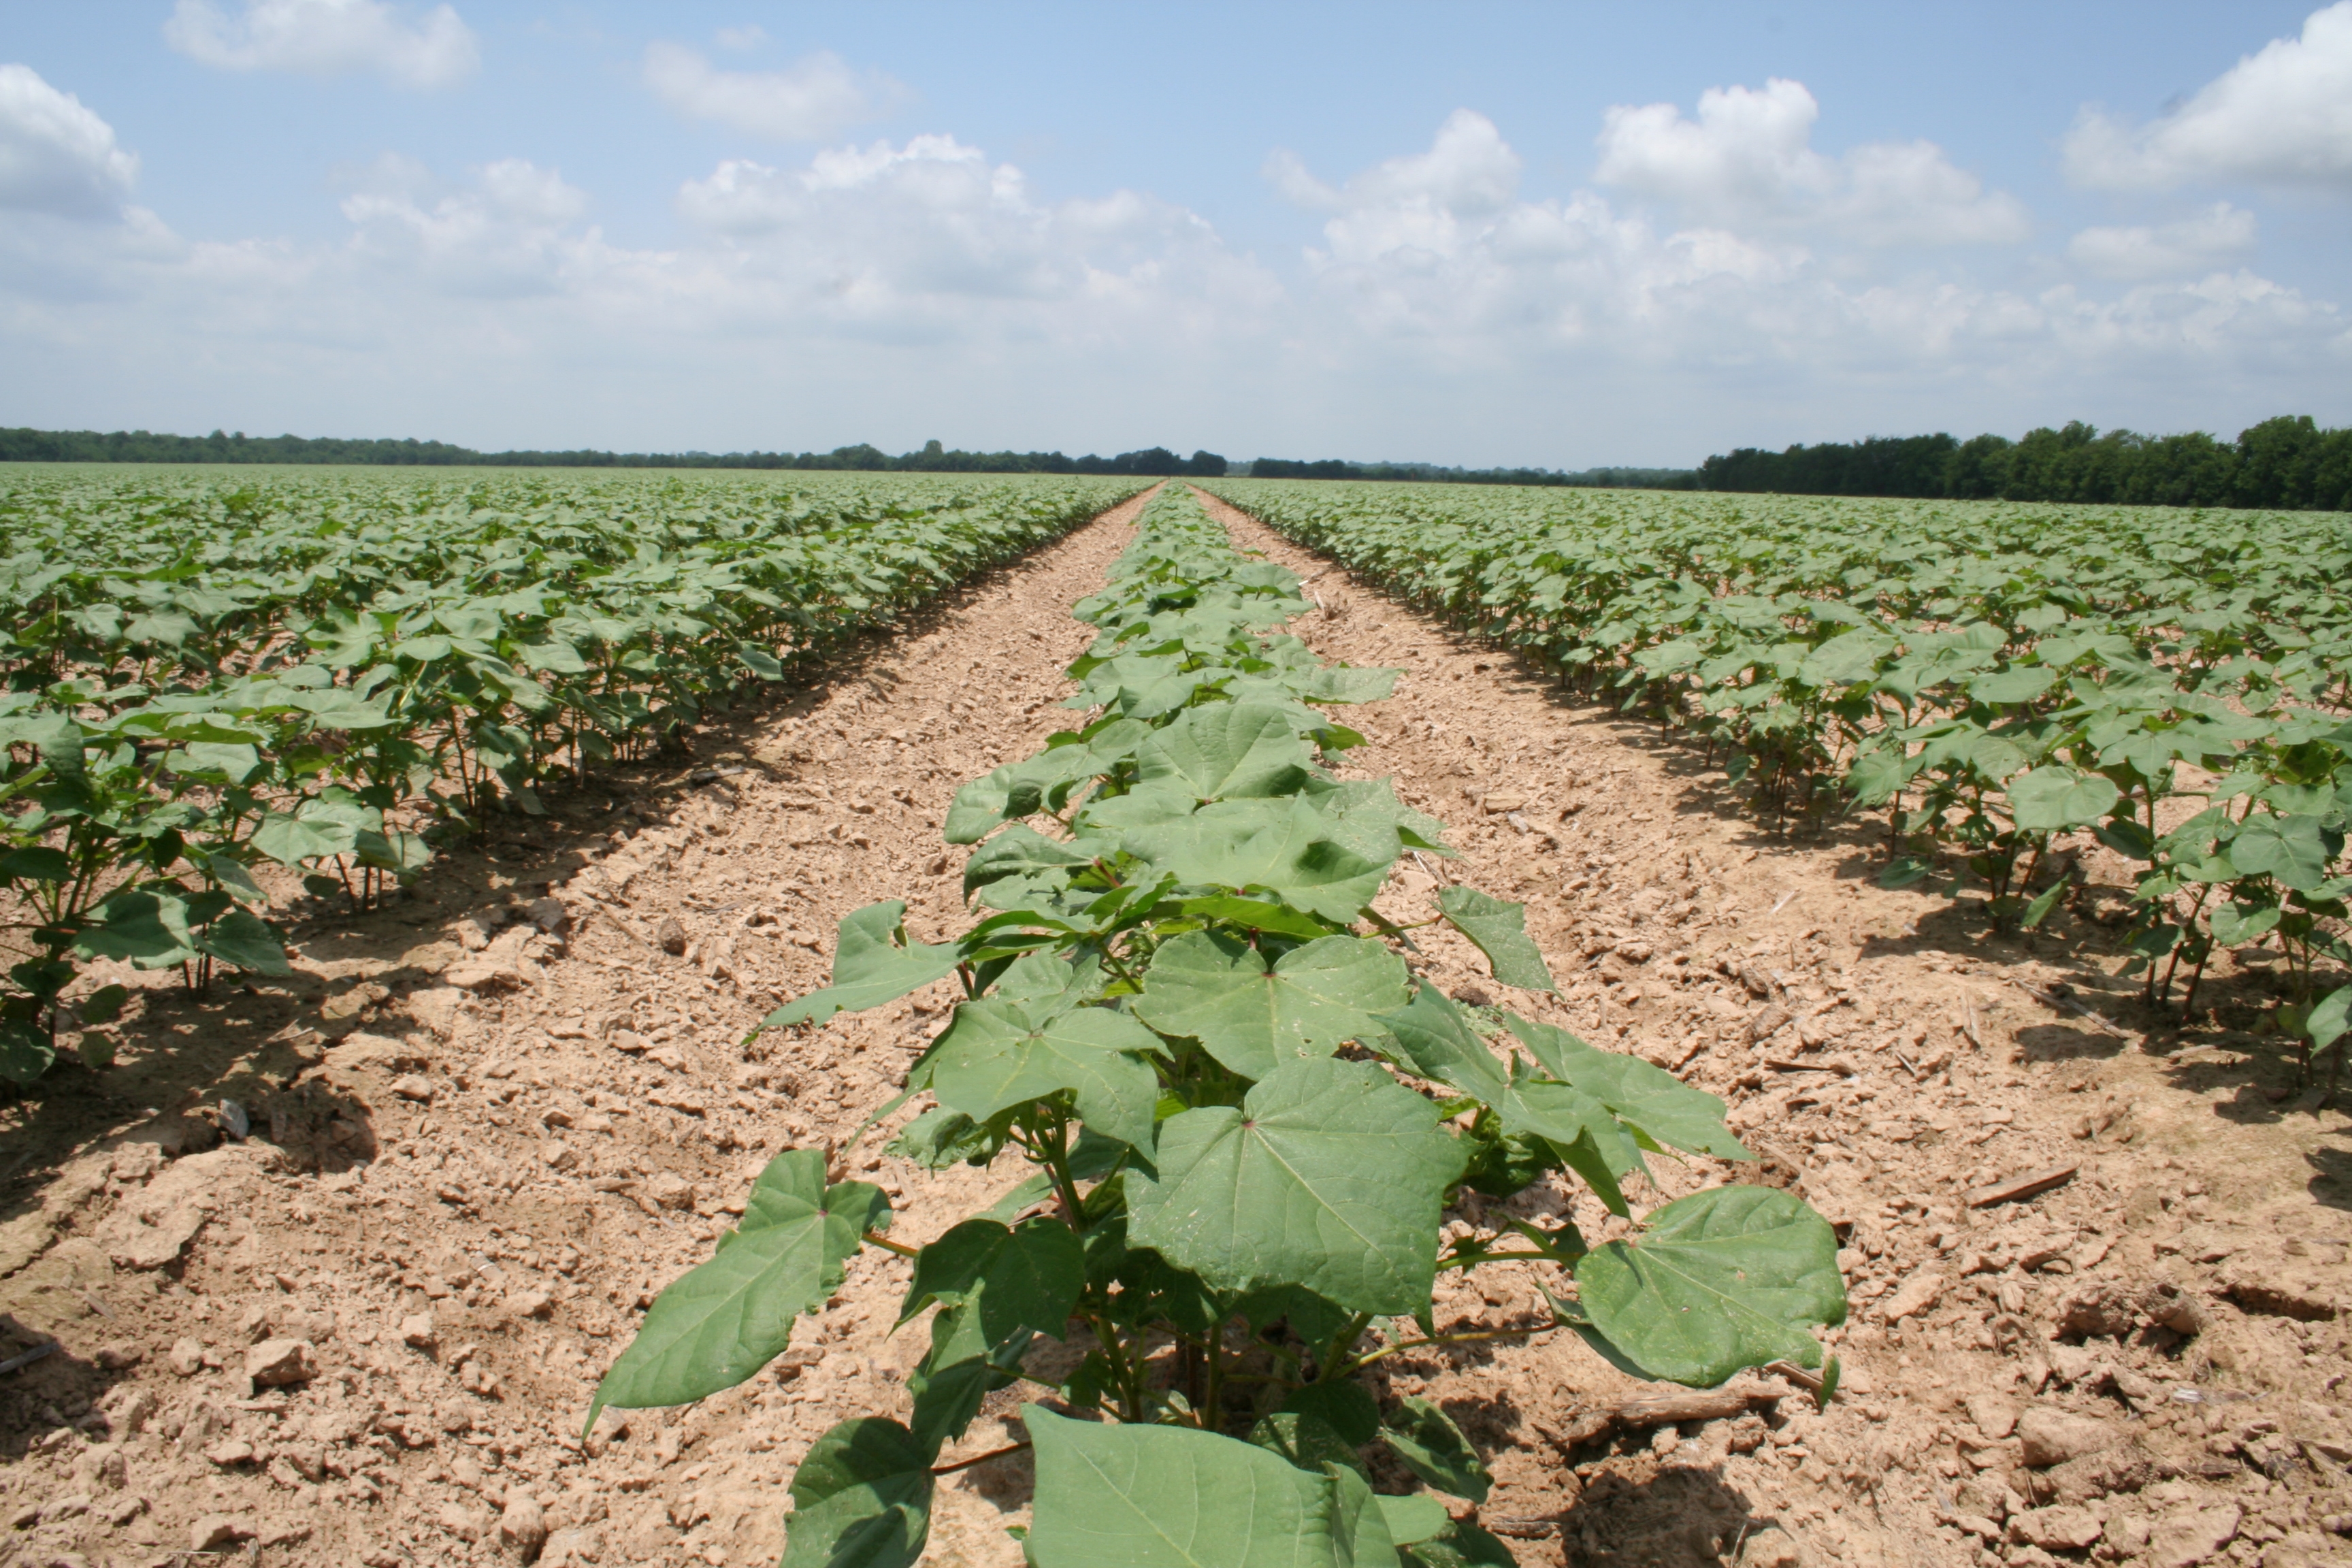 this agronomic image shows young cotton